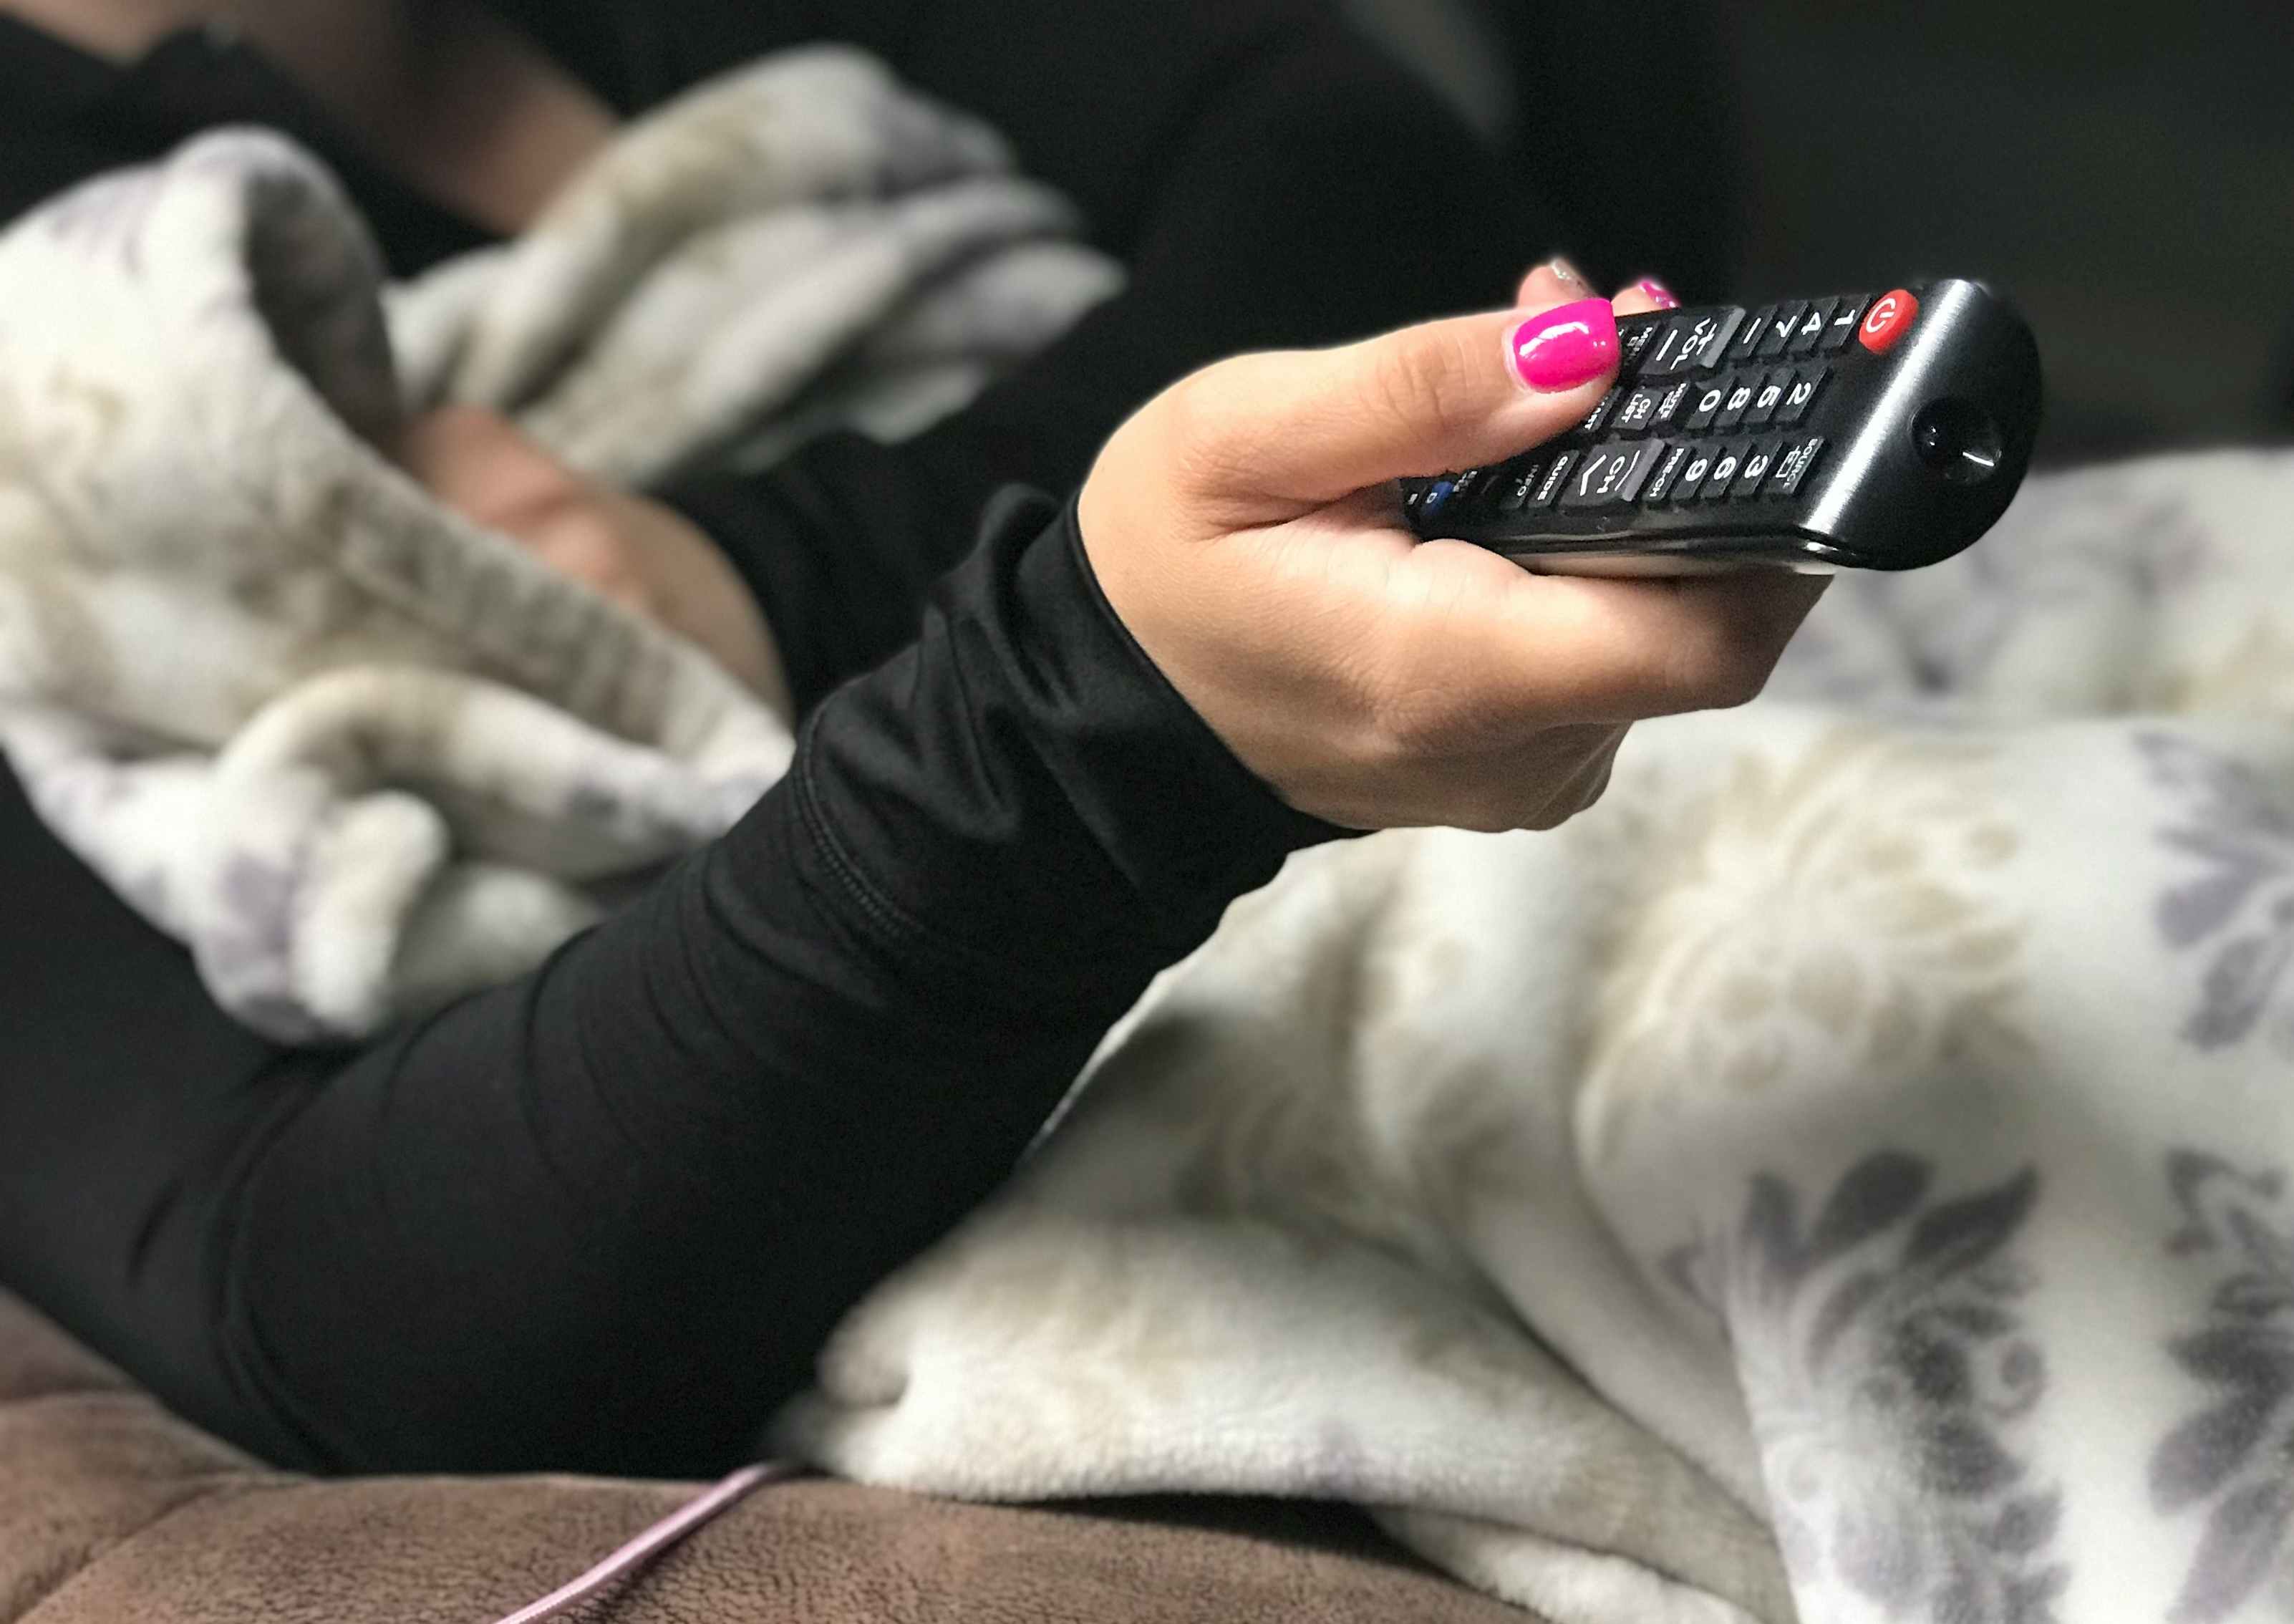 A person sitting on a couch with a blanket, holding a remote.